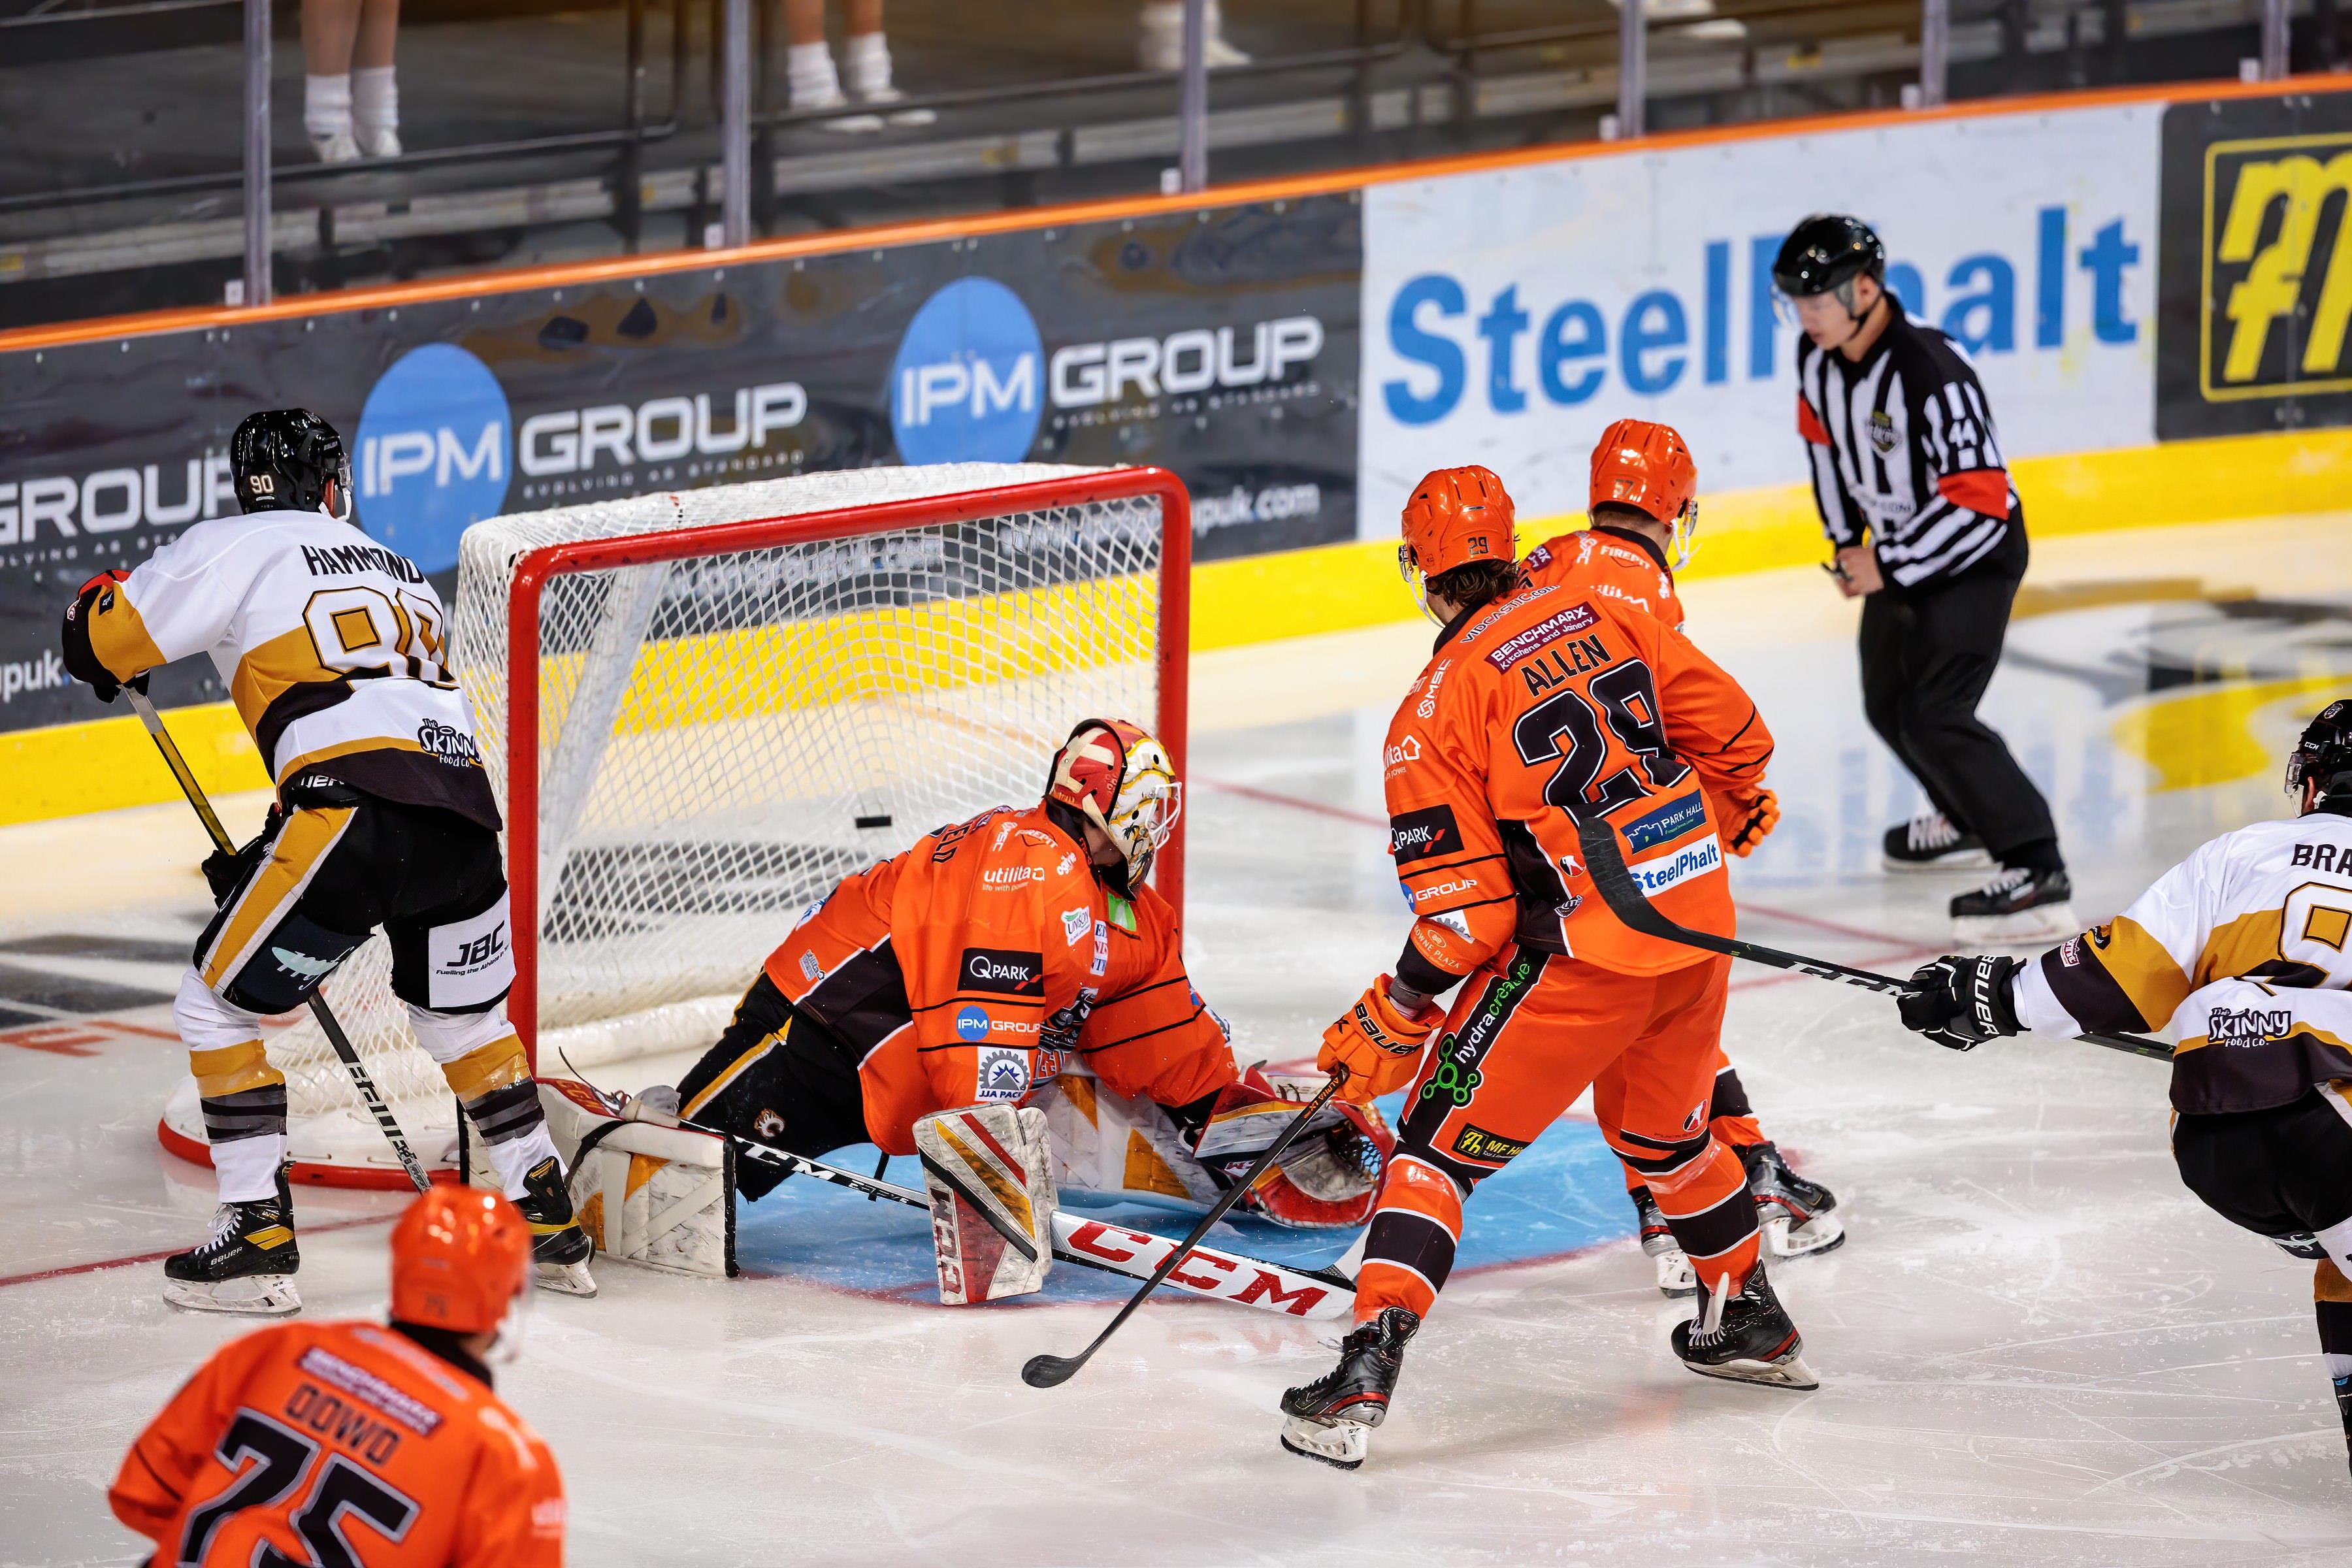 STEELERS 4-3 PANTHERS Top Image